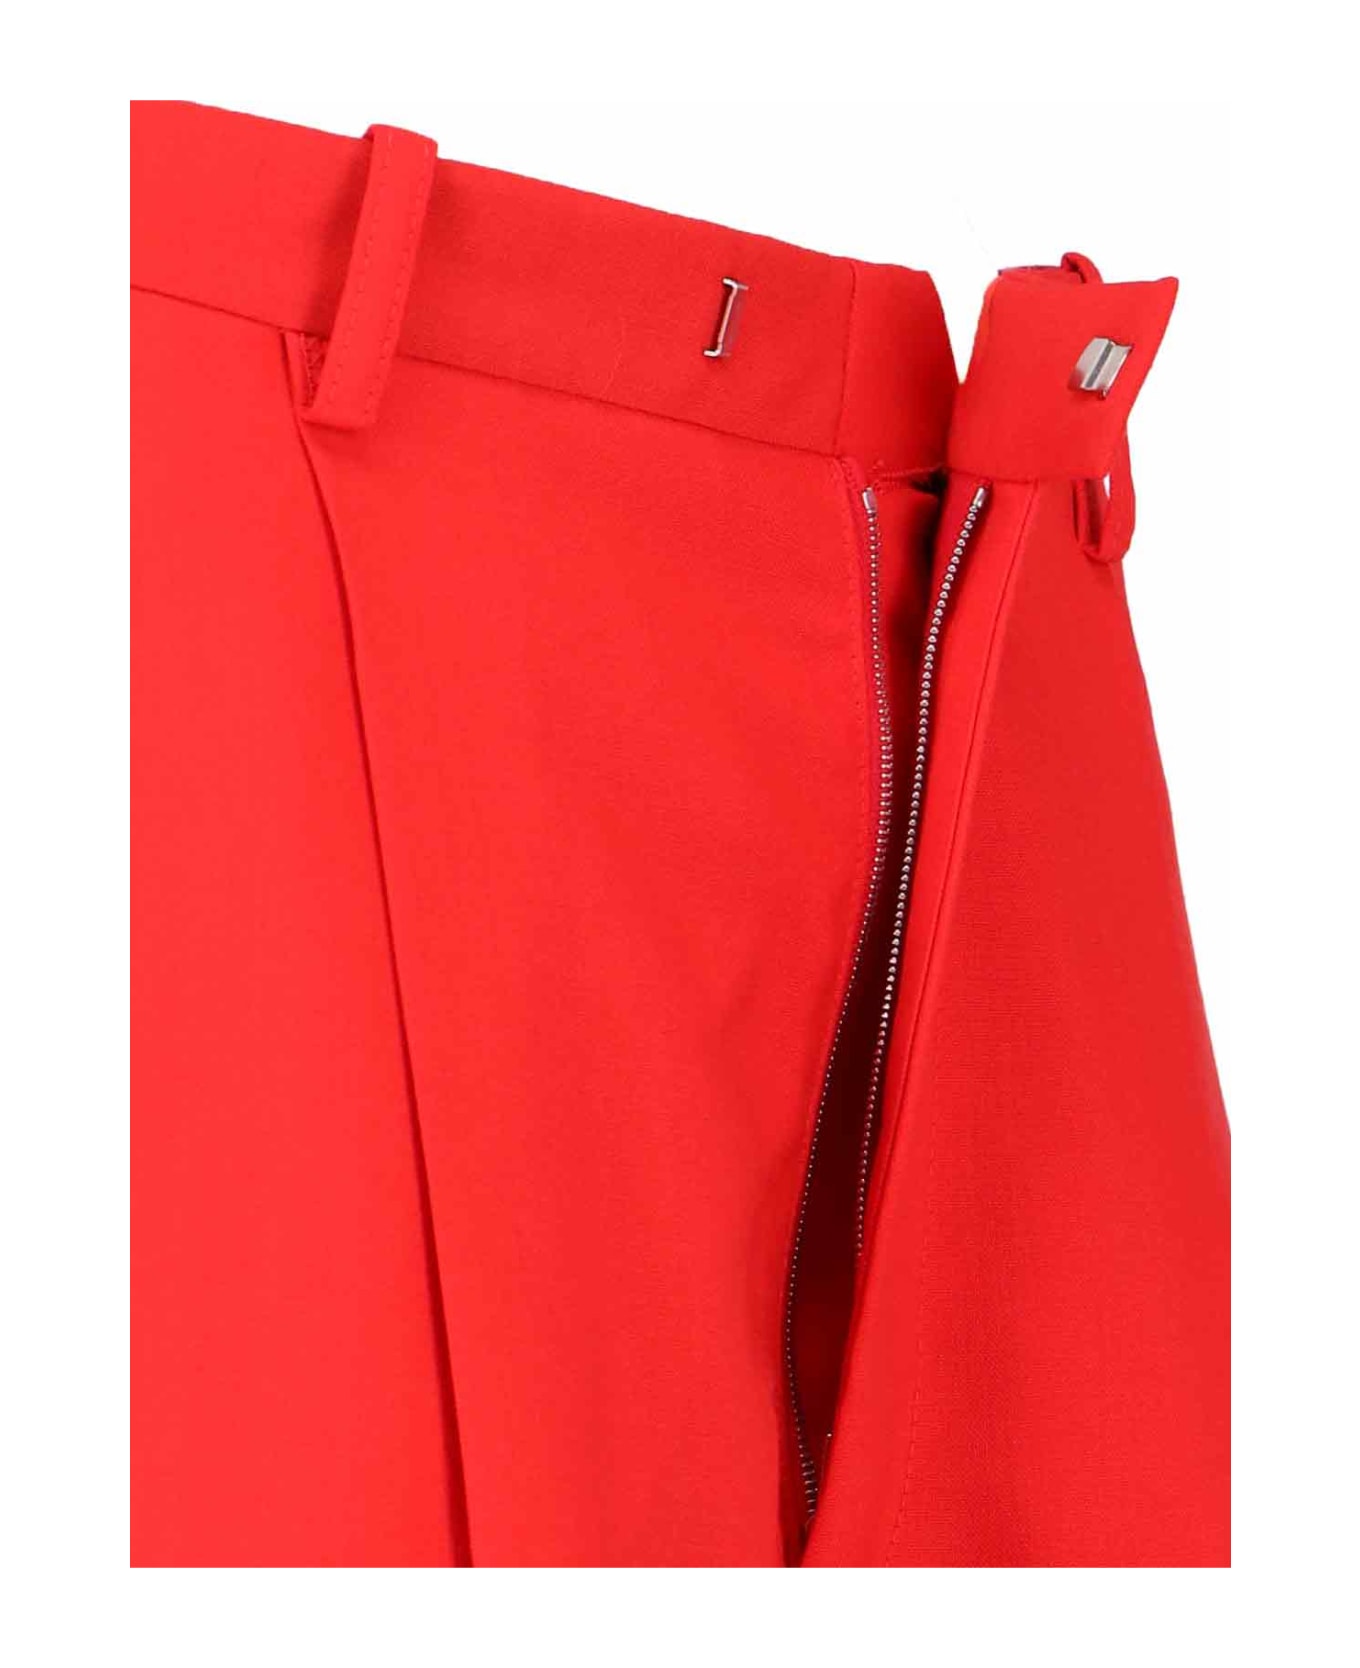 Marni Tailored Pants - Red